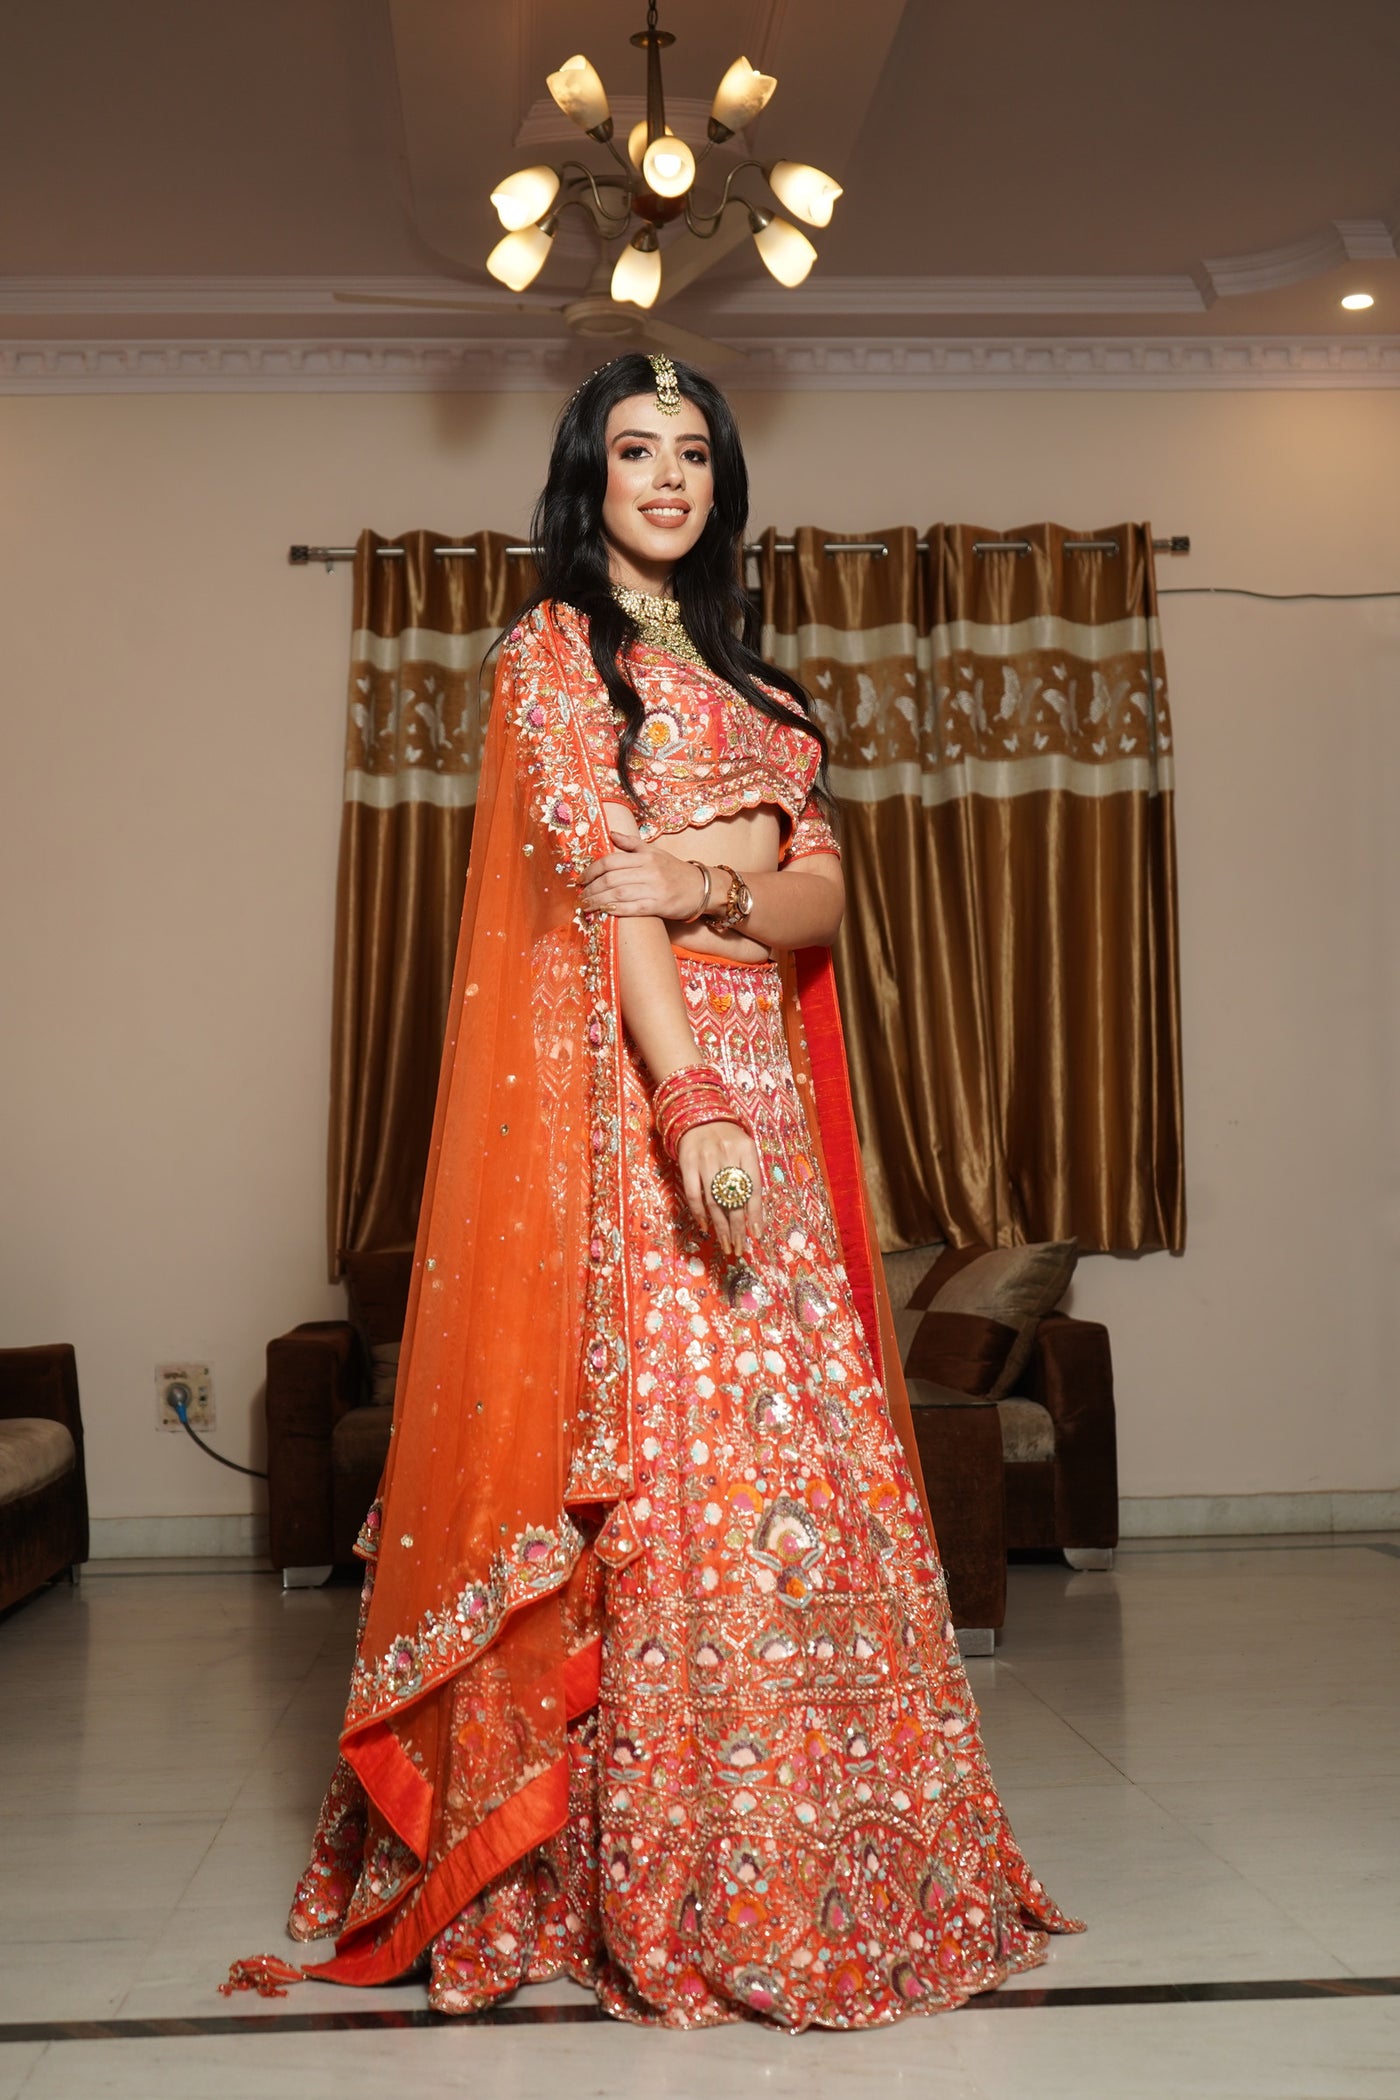 Classy orange color floral motif hand embroidered lehanga